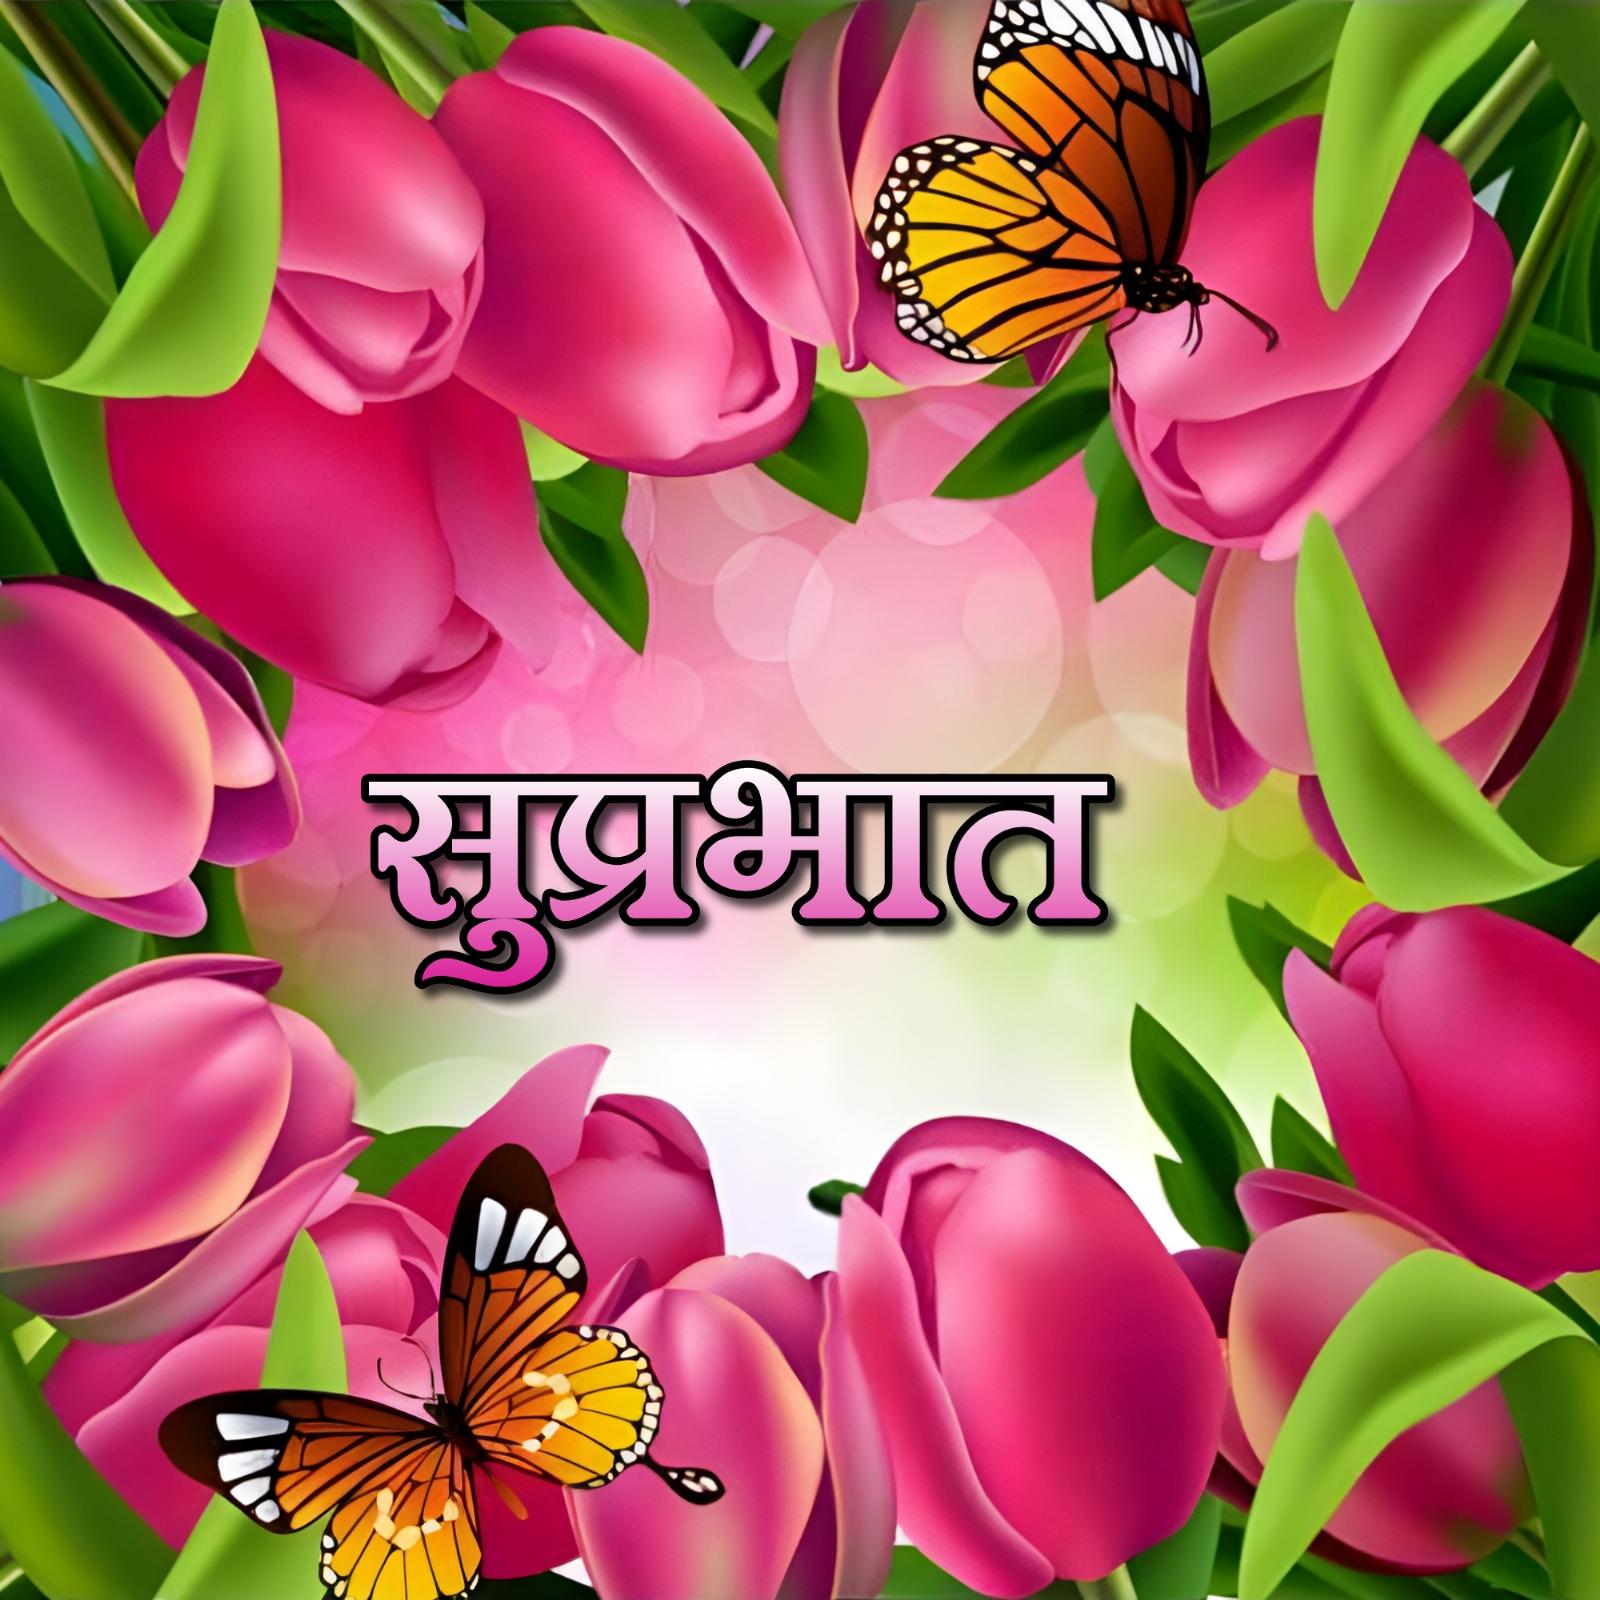 Suprabhat With Flower And Butterfly Images